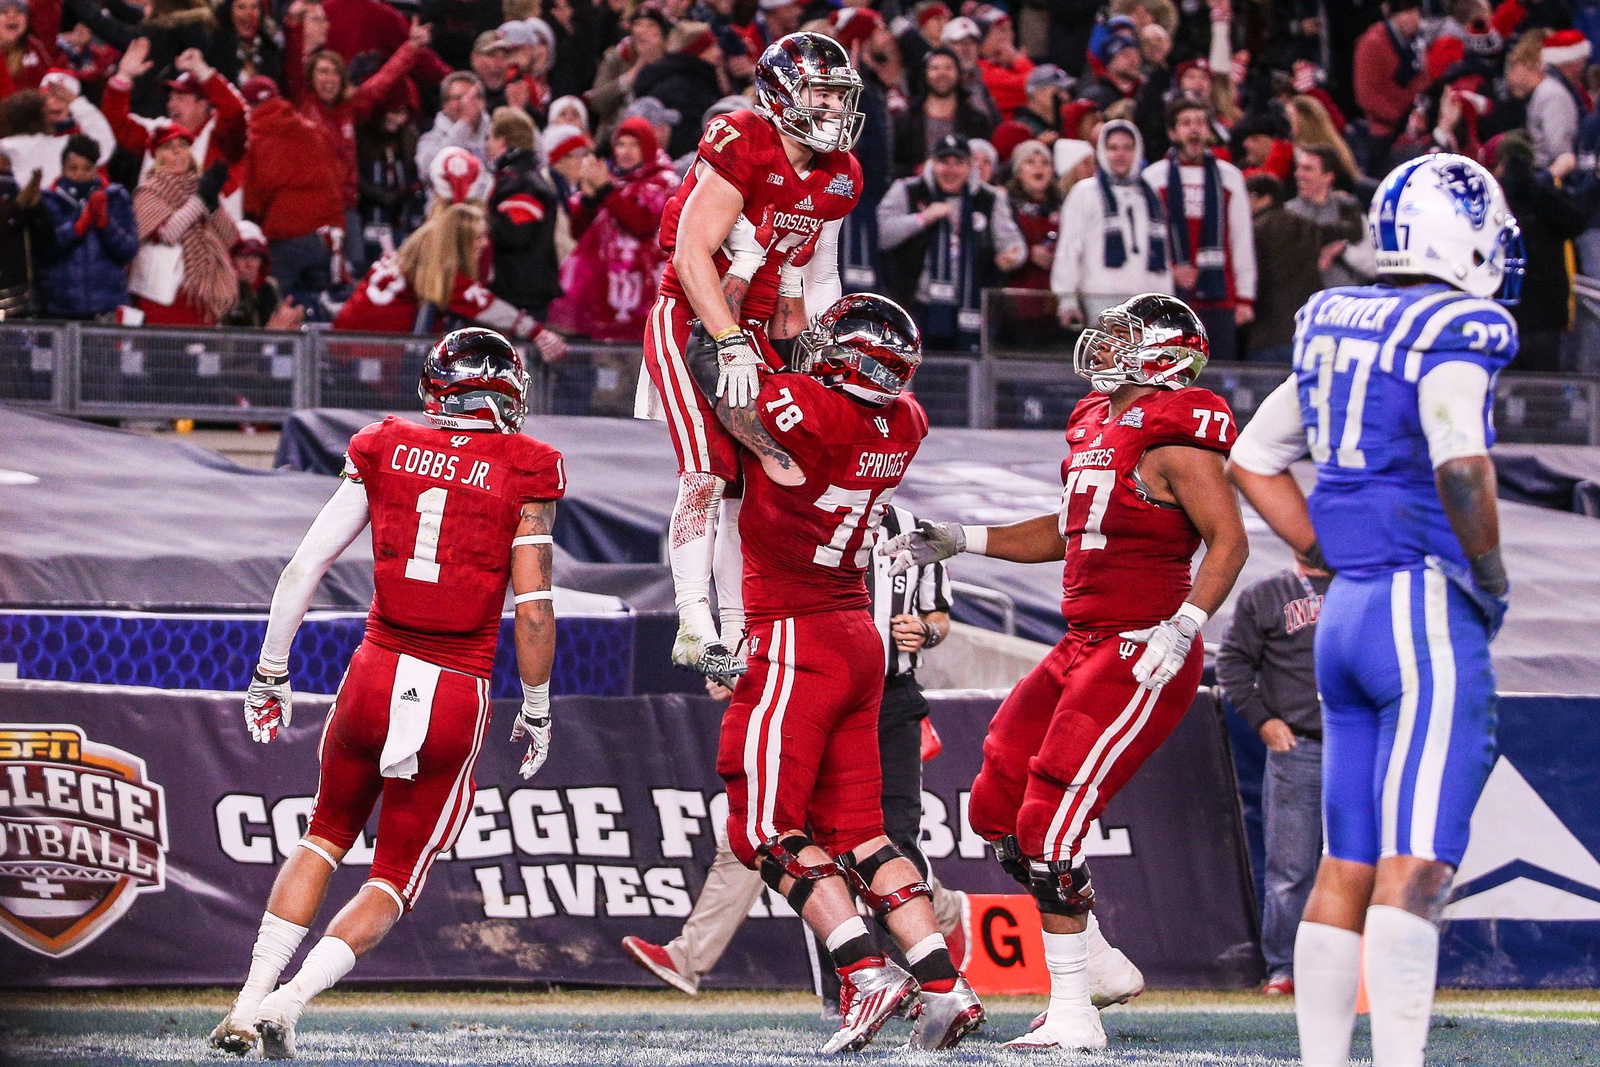 Indiana Hoosiers offensive lineman Jason Spriggs (78) celebrates with wide receiver Mitchell Paige (87) after scoring a touchdown during the 2015 New Era Pinstripe Bowl at Yankee Stadium. The Blue Devils won 44-41 in overtime.